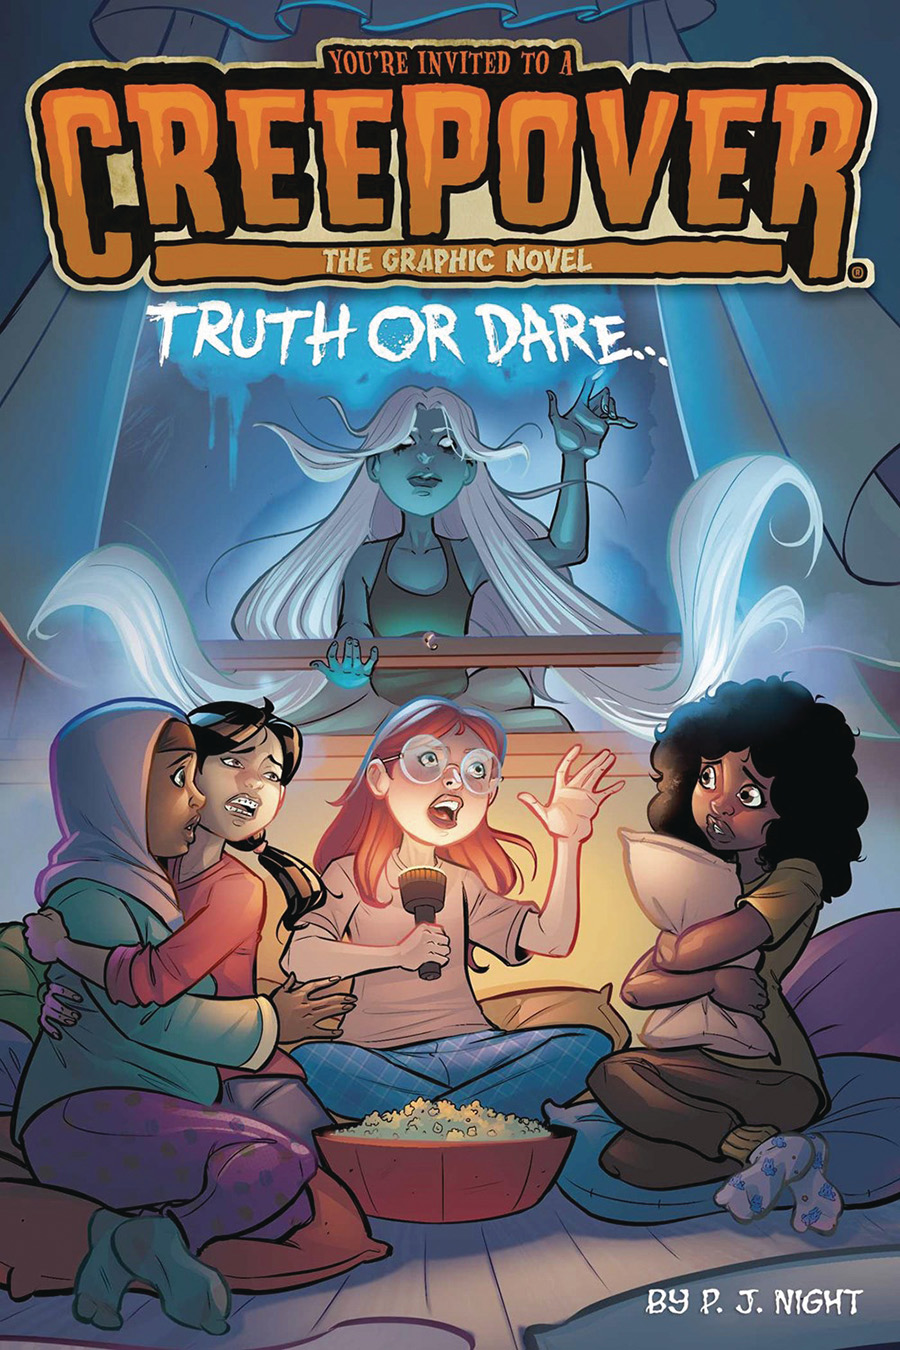 Youre Invited To A Creepover The Graphic Novel Vol 1 Truth Or Dare TP